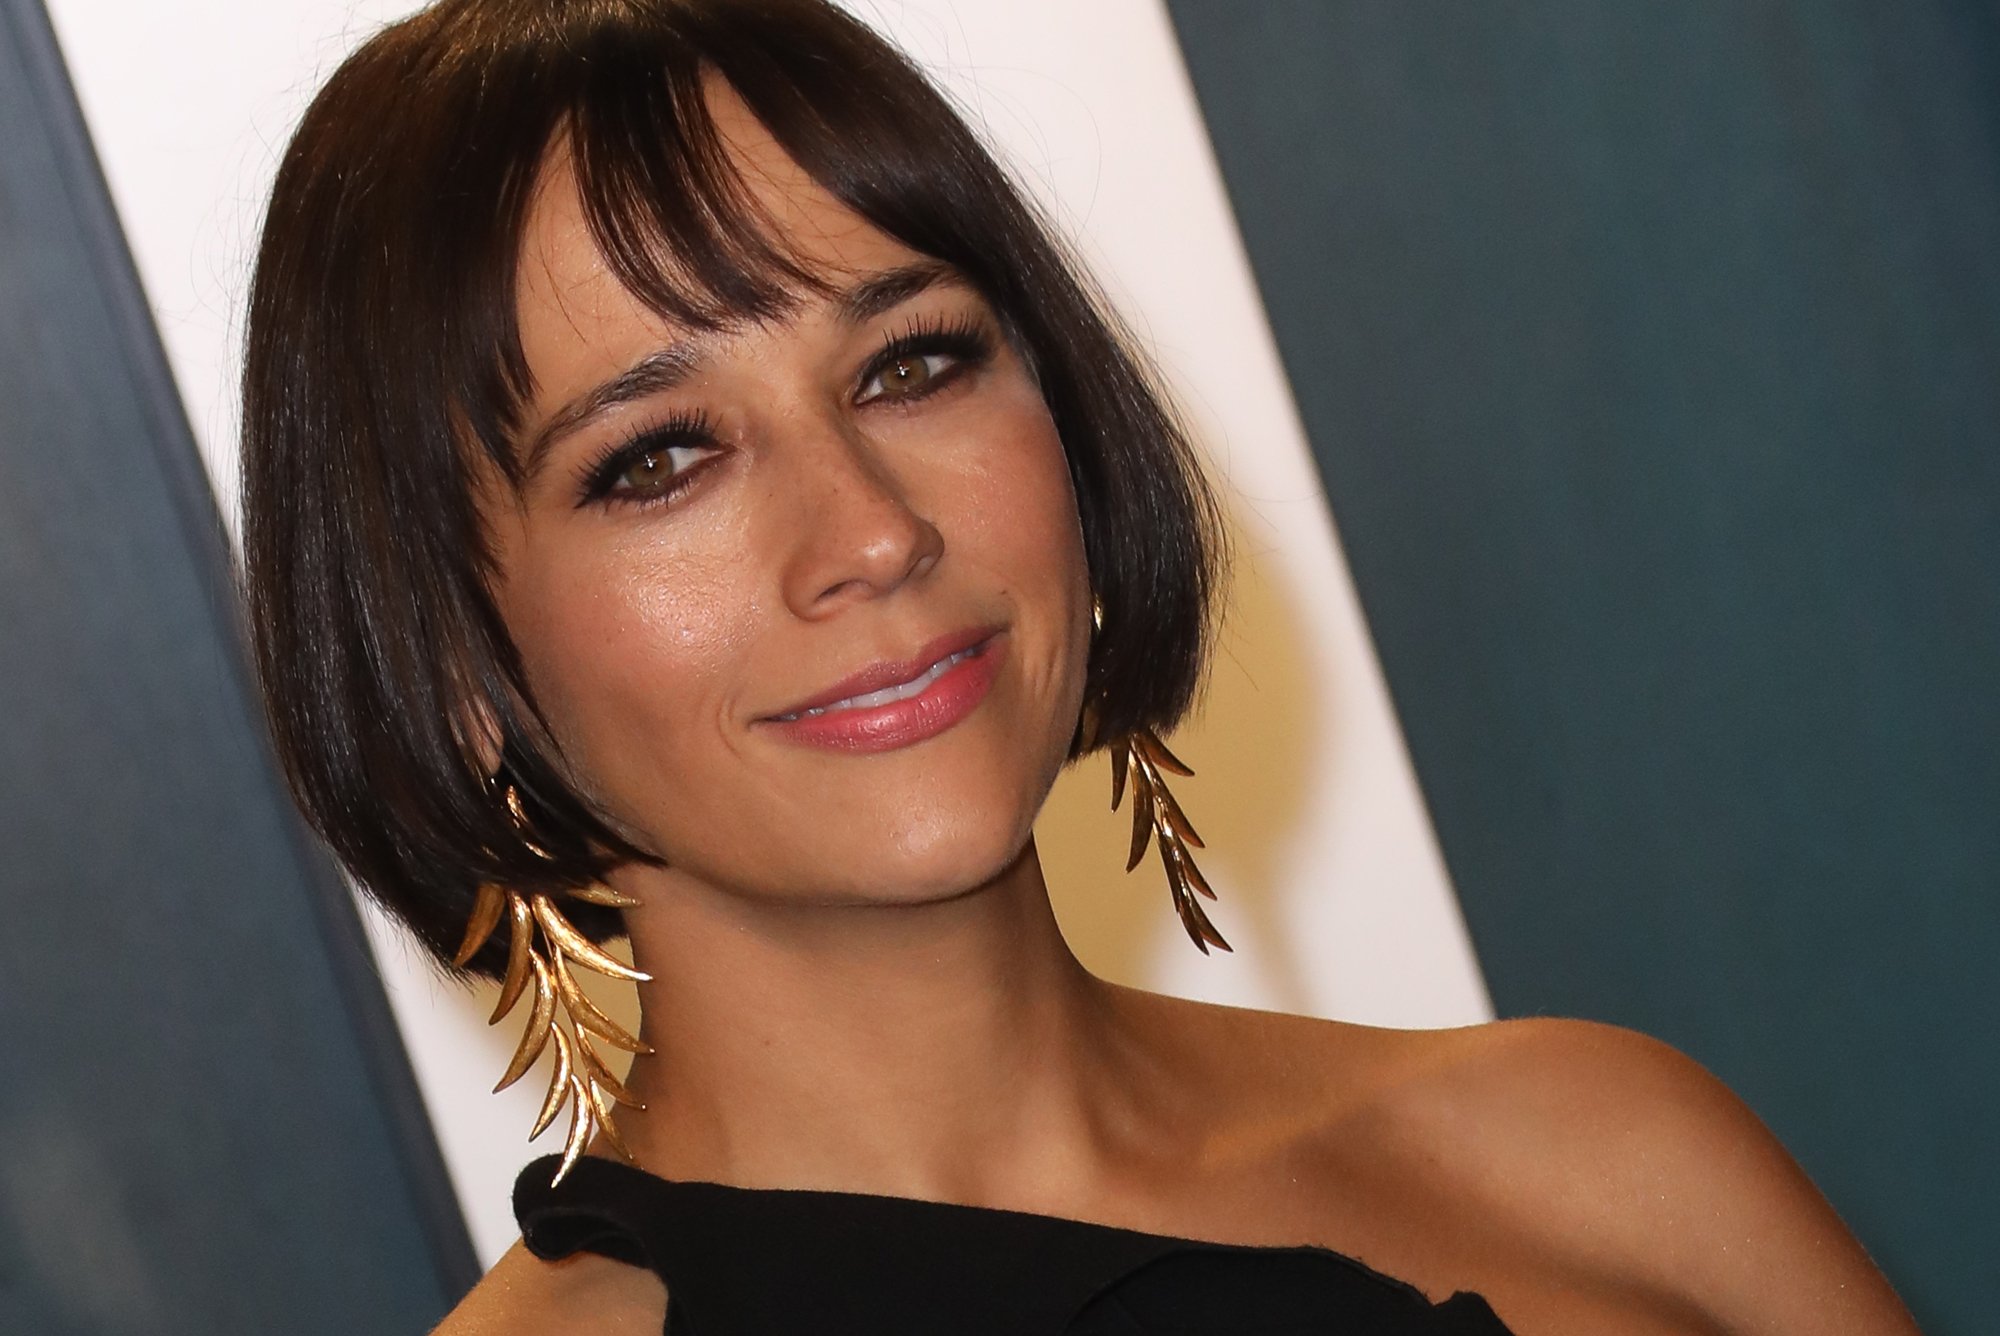 The Office': Why Rashida Jones Was 'Really Mad' About the Show